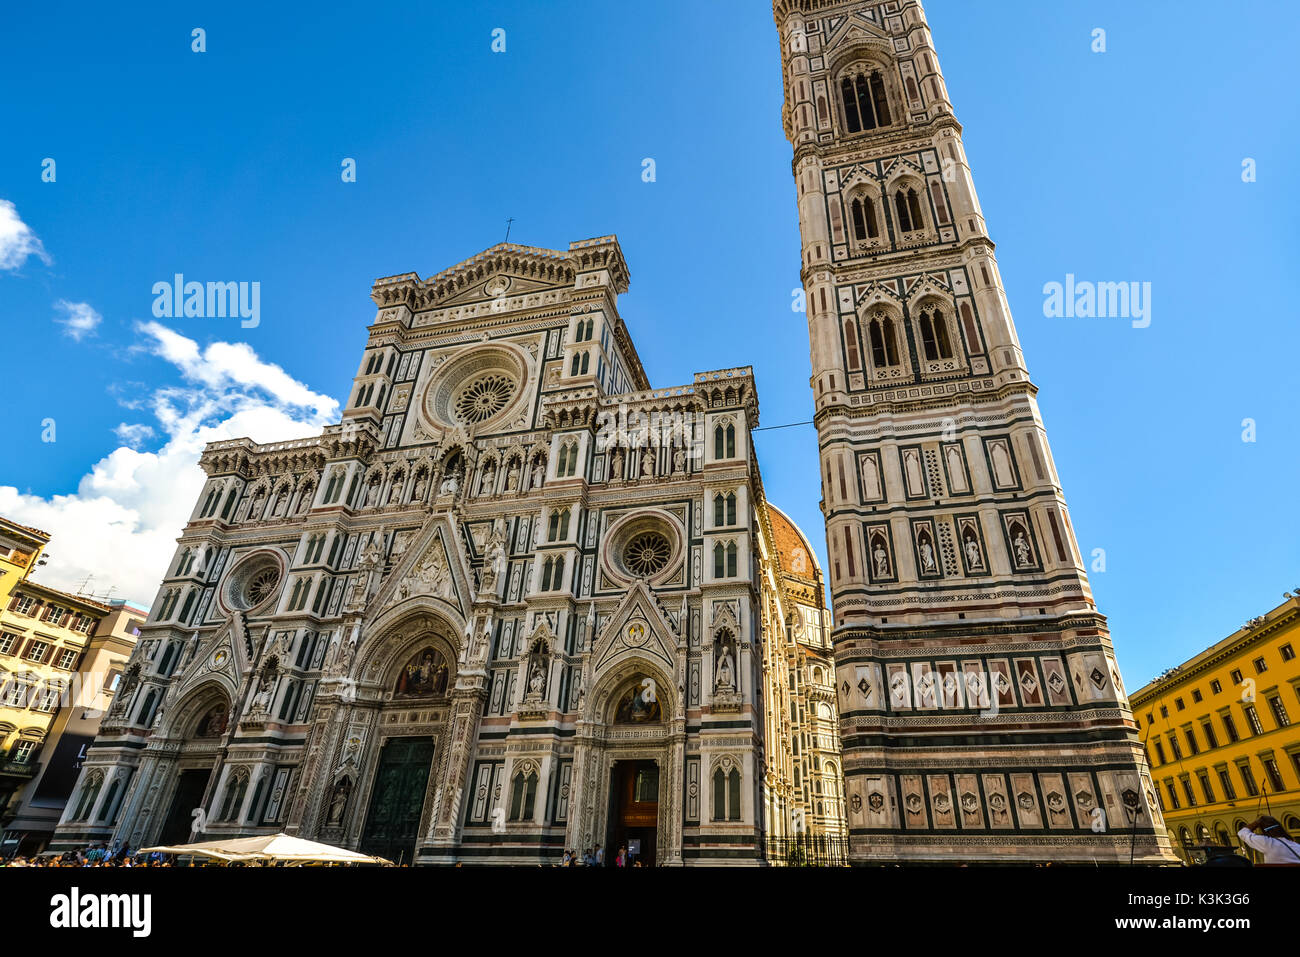 The Florence Cathedral or Santa Maria del Fiore alongside Giotto's Campanile or Bell Tower on the Piazza del Duomo in Florence Italy Stock Photo